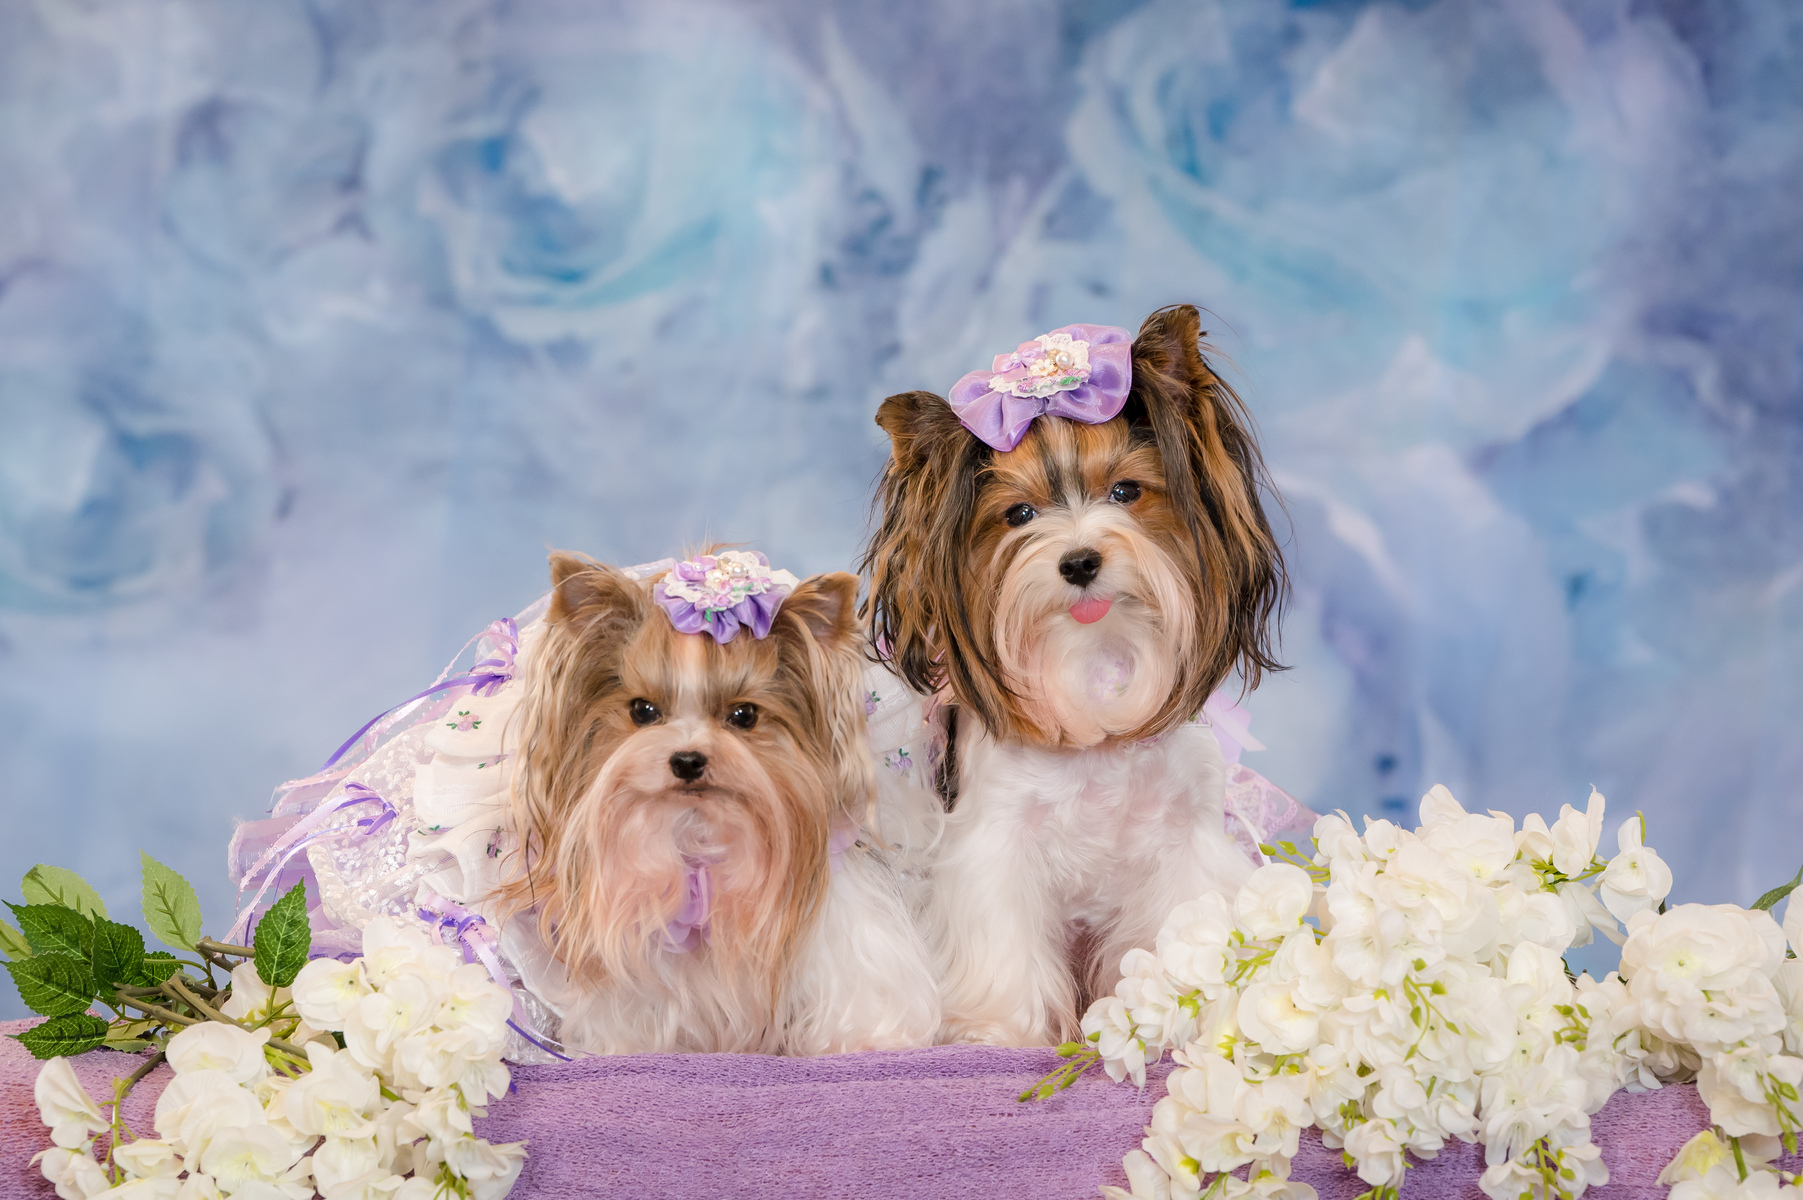 To schedule a pet photography session in Palm Beach Gardens, call 561-307-9875, Pet Fashion photographer